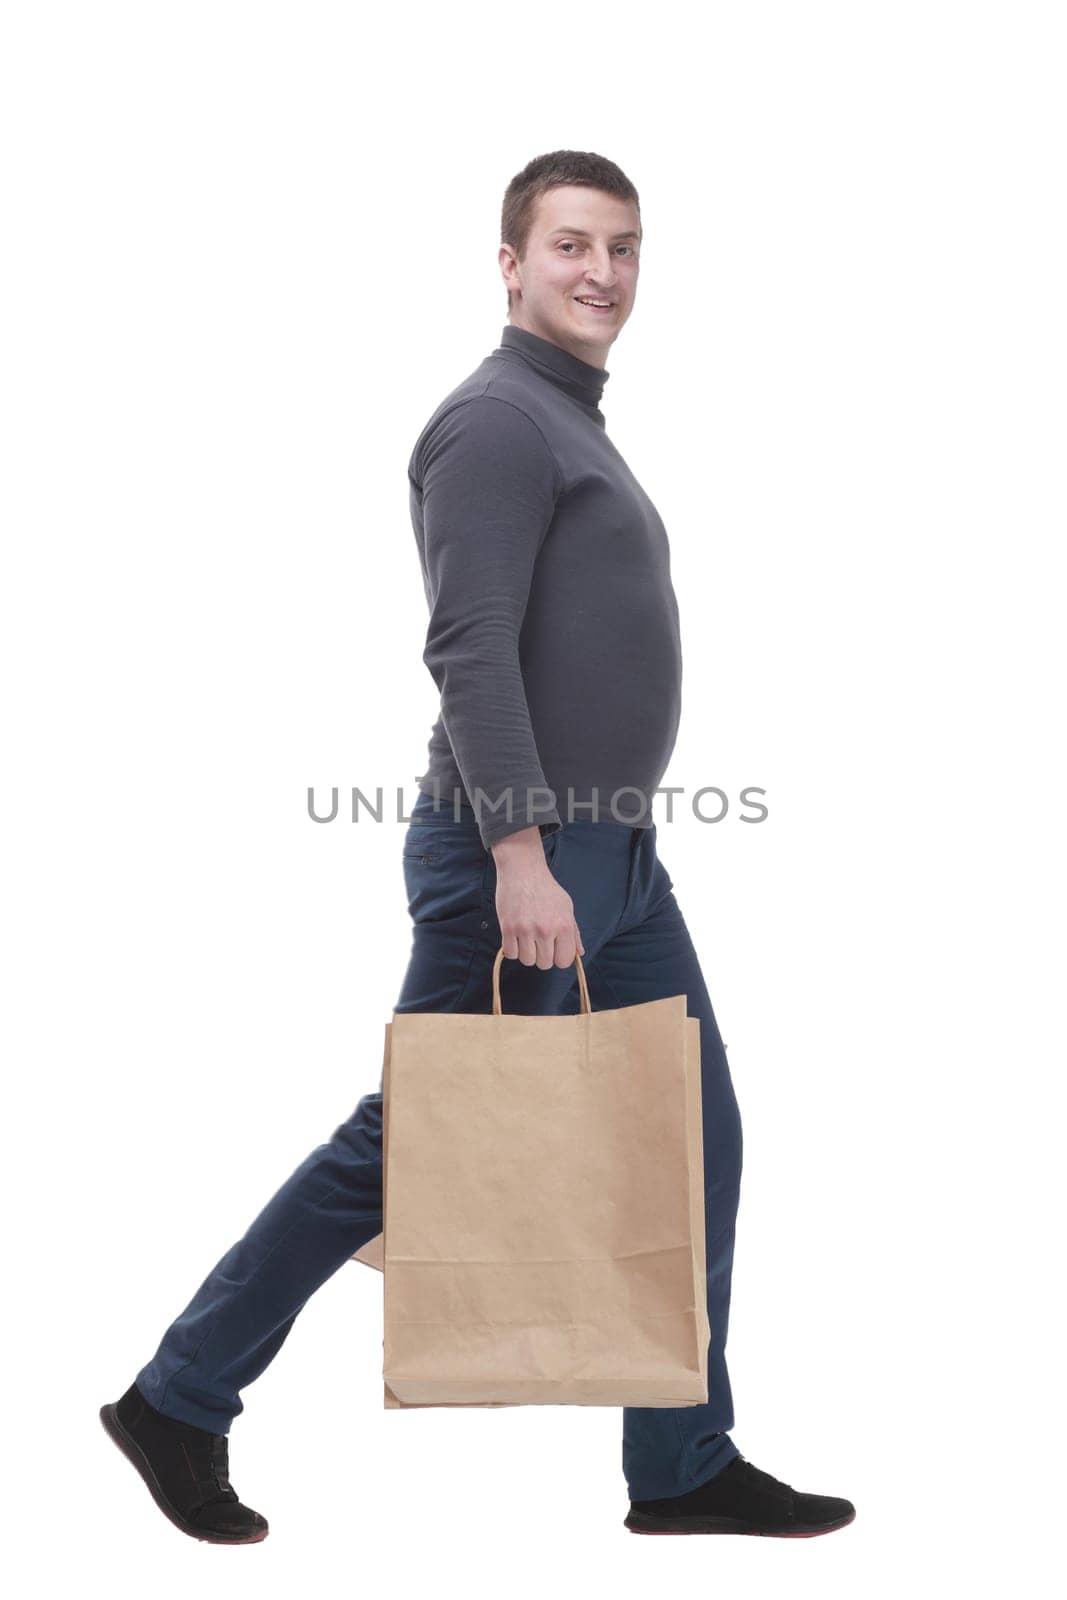 in full growth. casual young man with shopping bags. isolated on a white background.